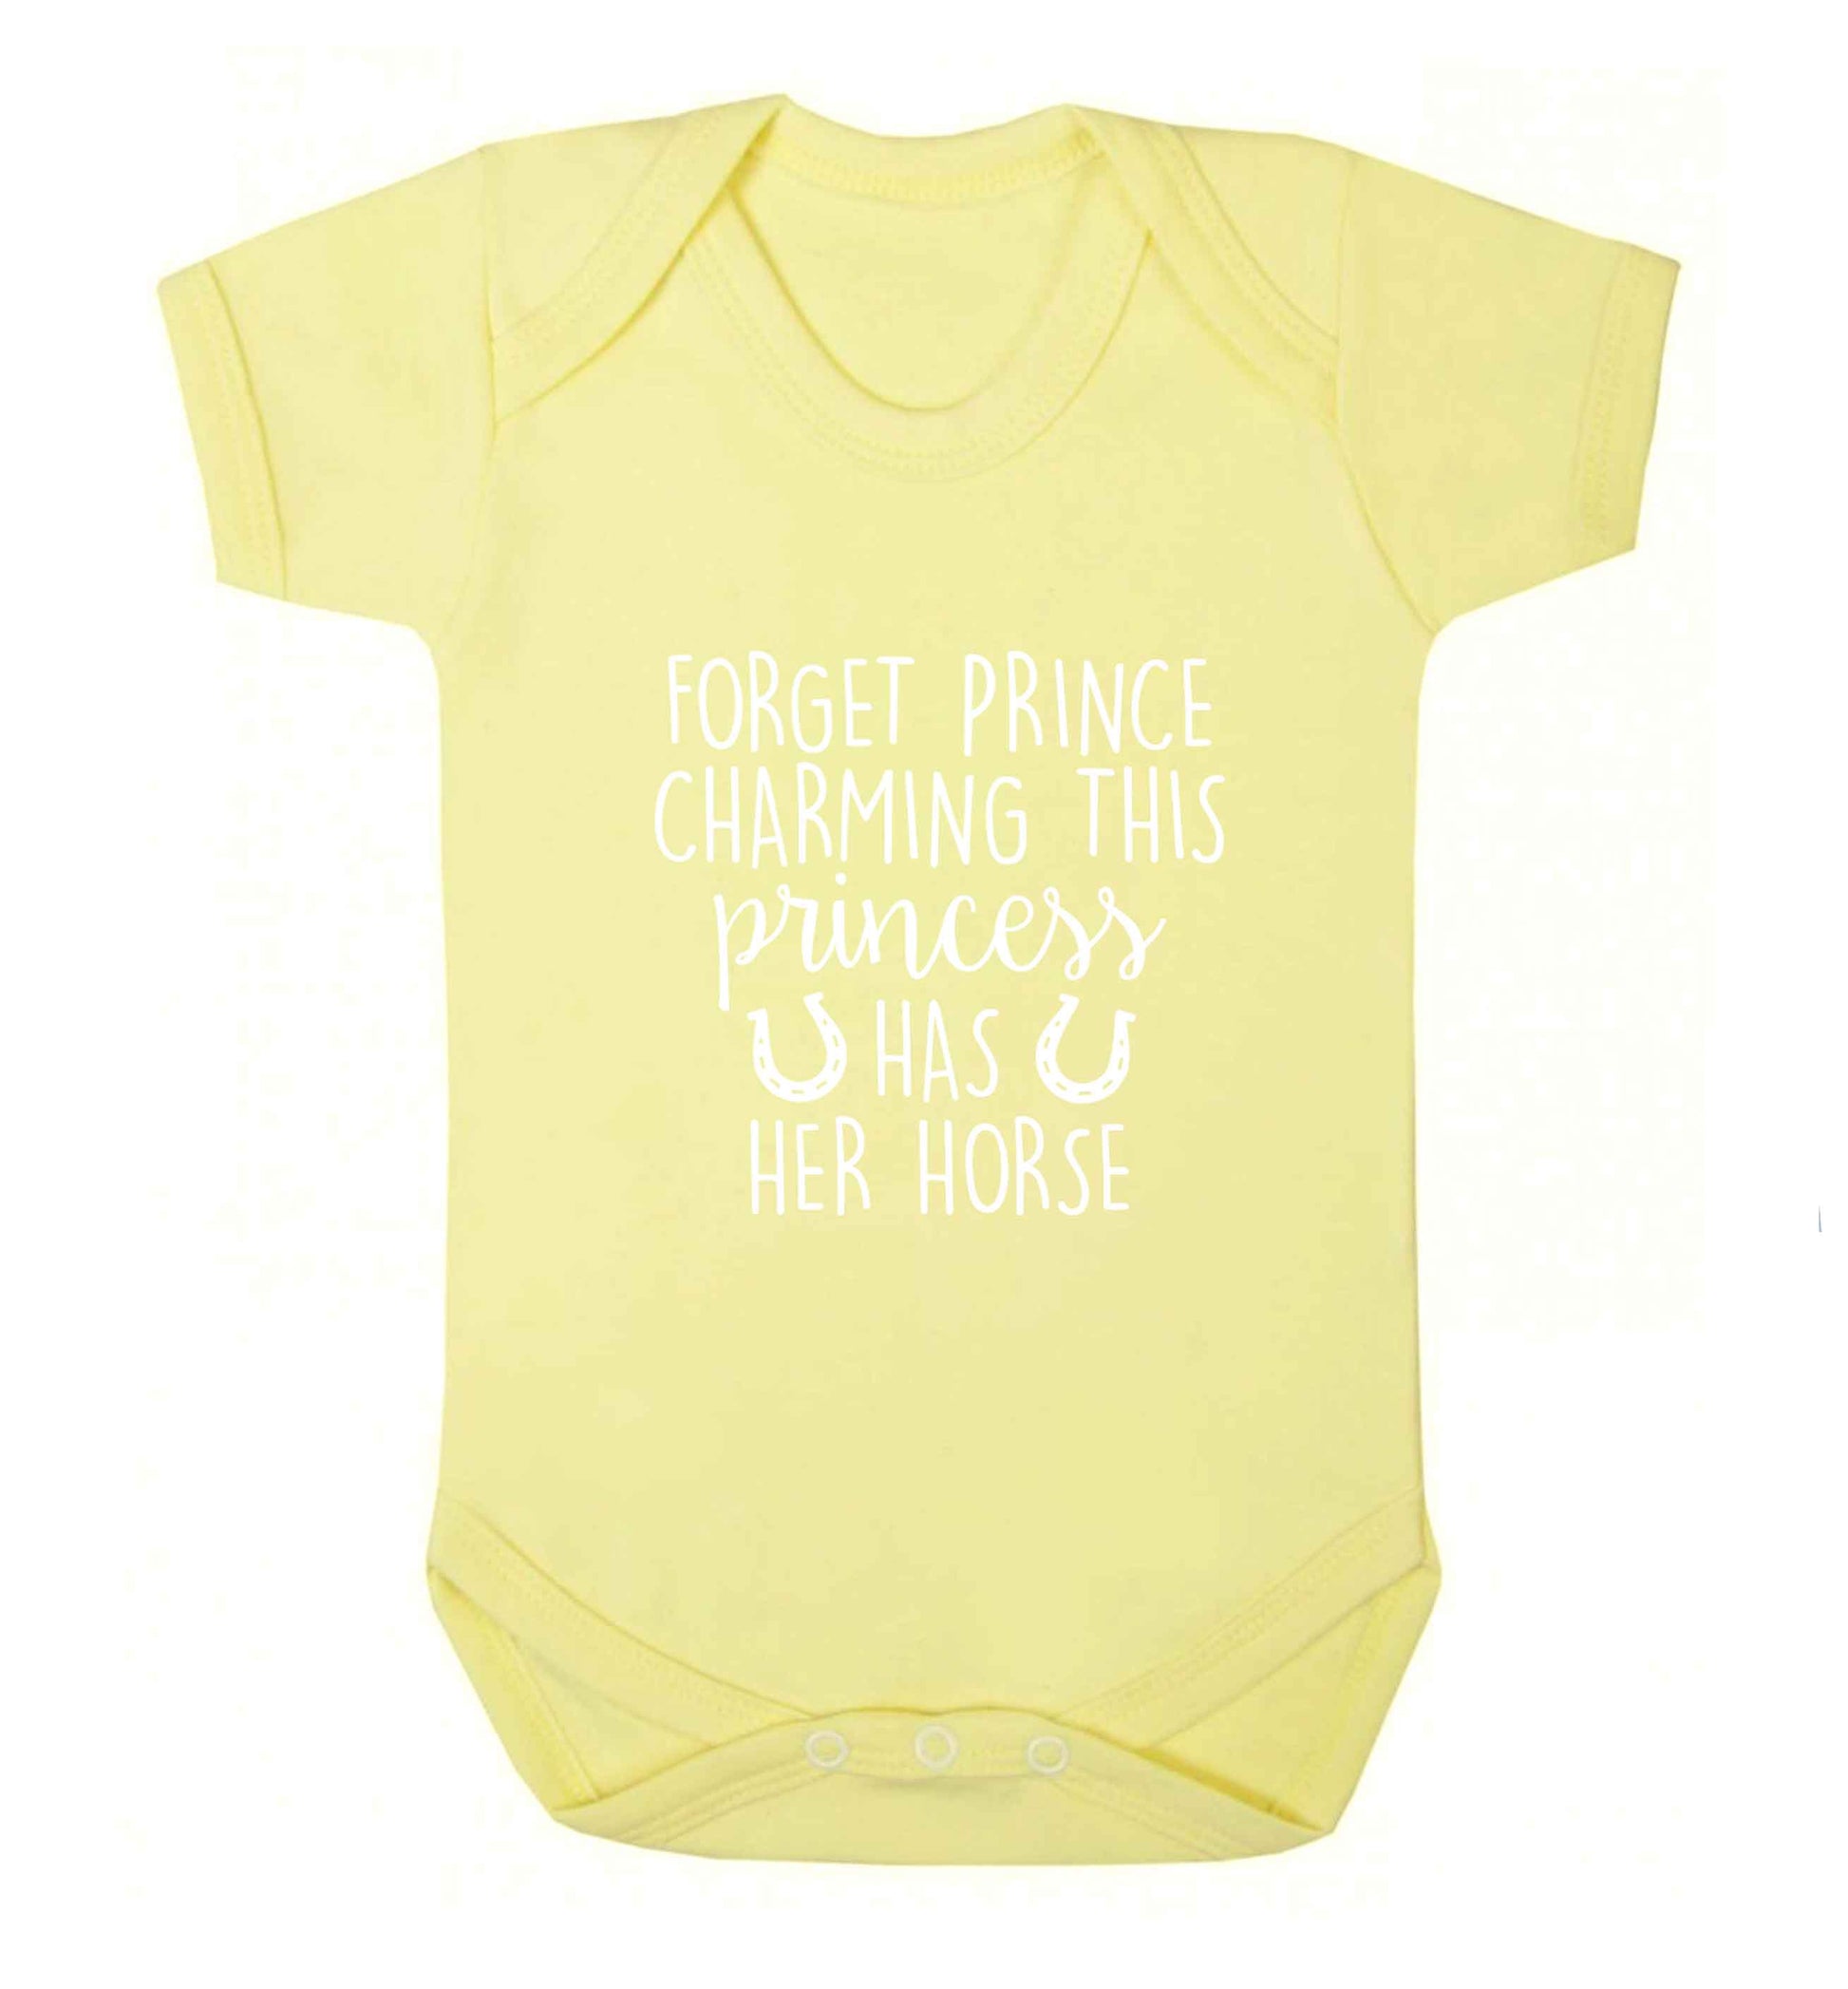 Forget prince charming this princess has her horse baby vest pale yellow 18-24 months